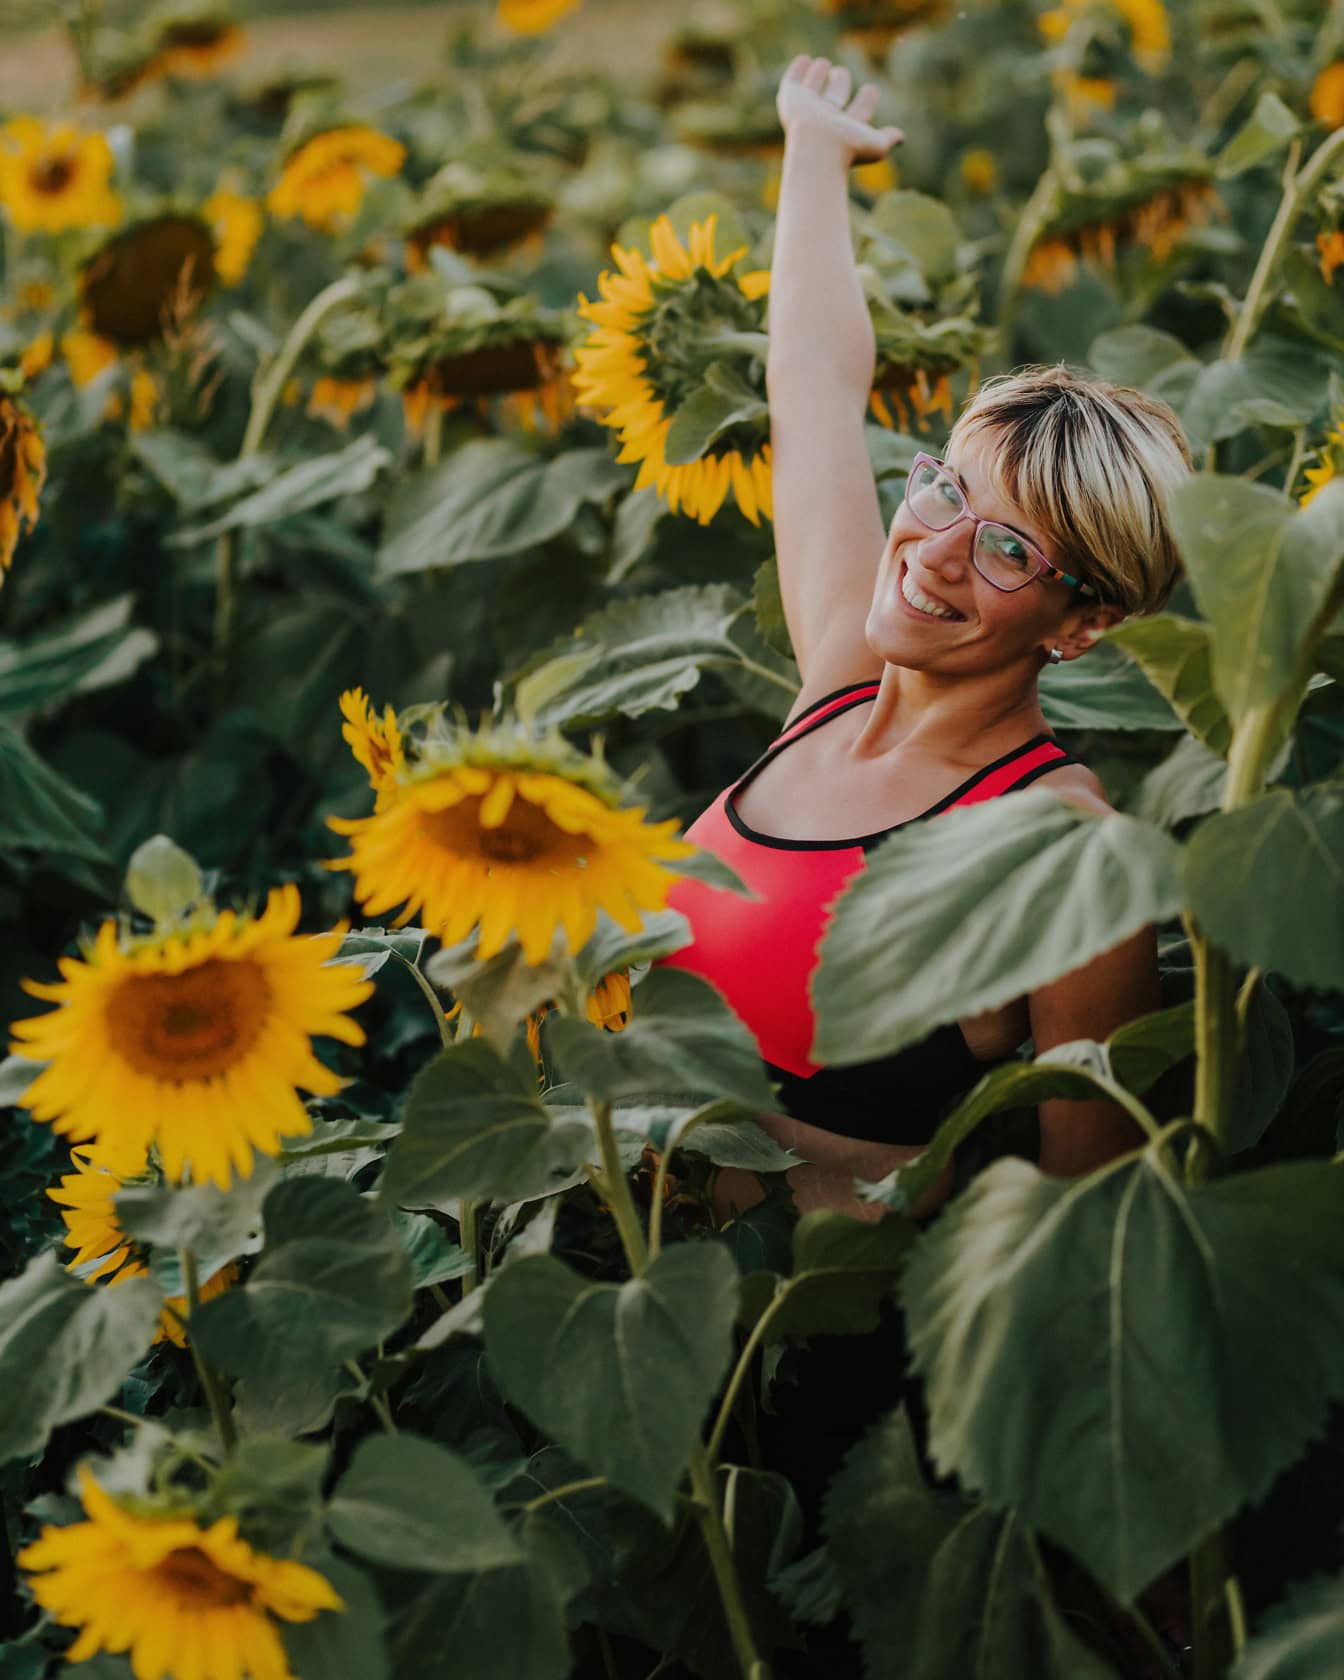 Portrait of a happy smiling young woman with short blonde hairstyle  in a field of sunflowers with her hand up in the air